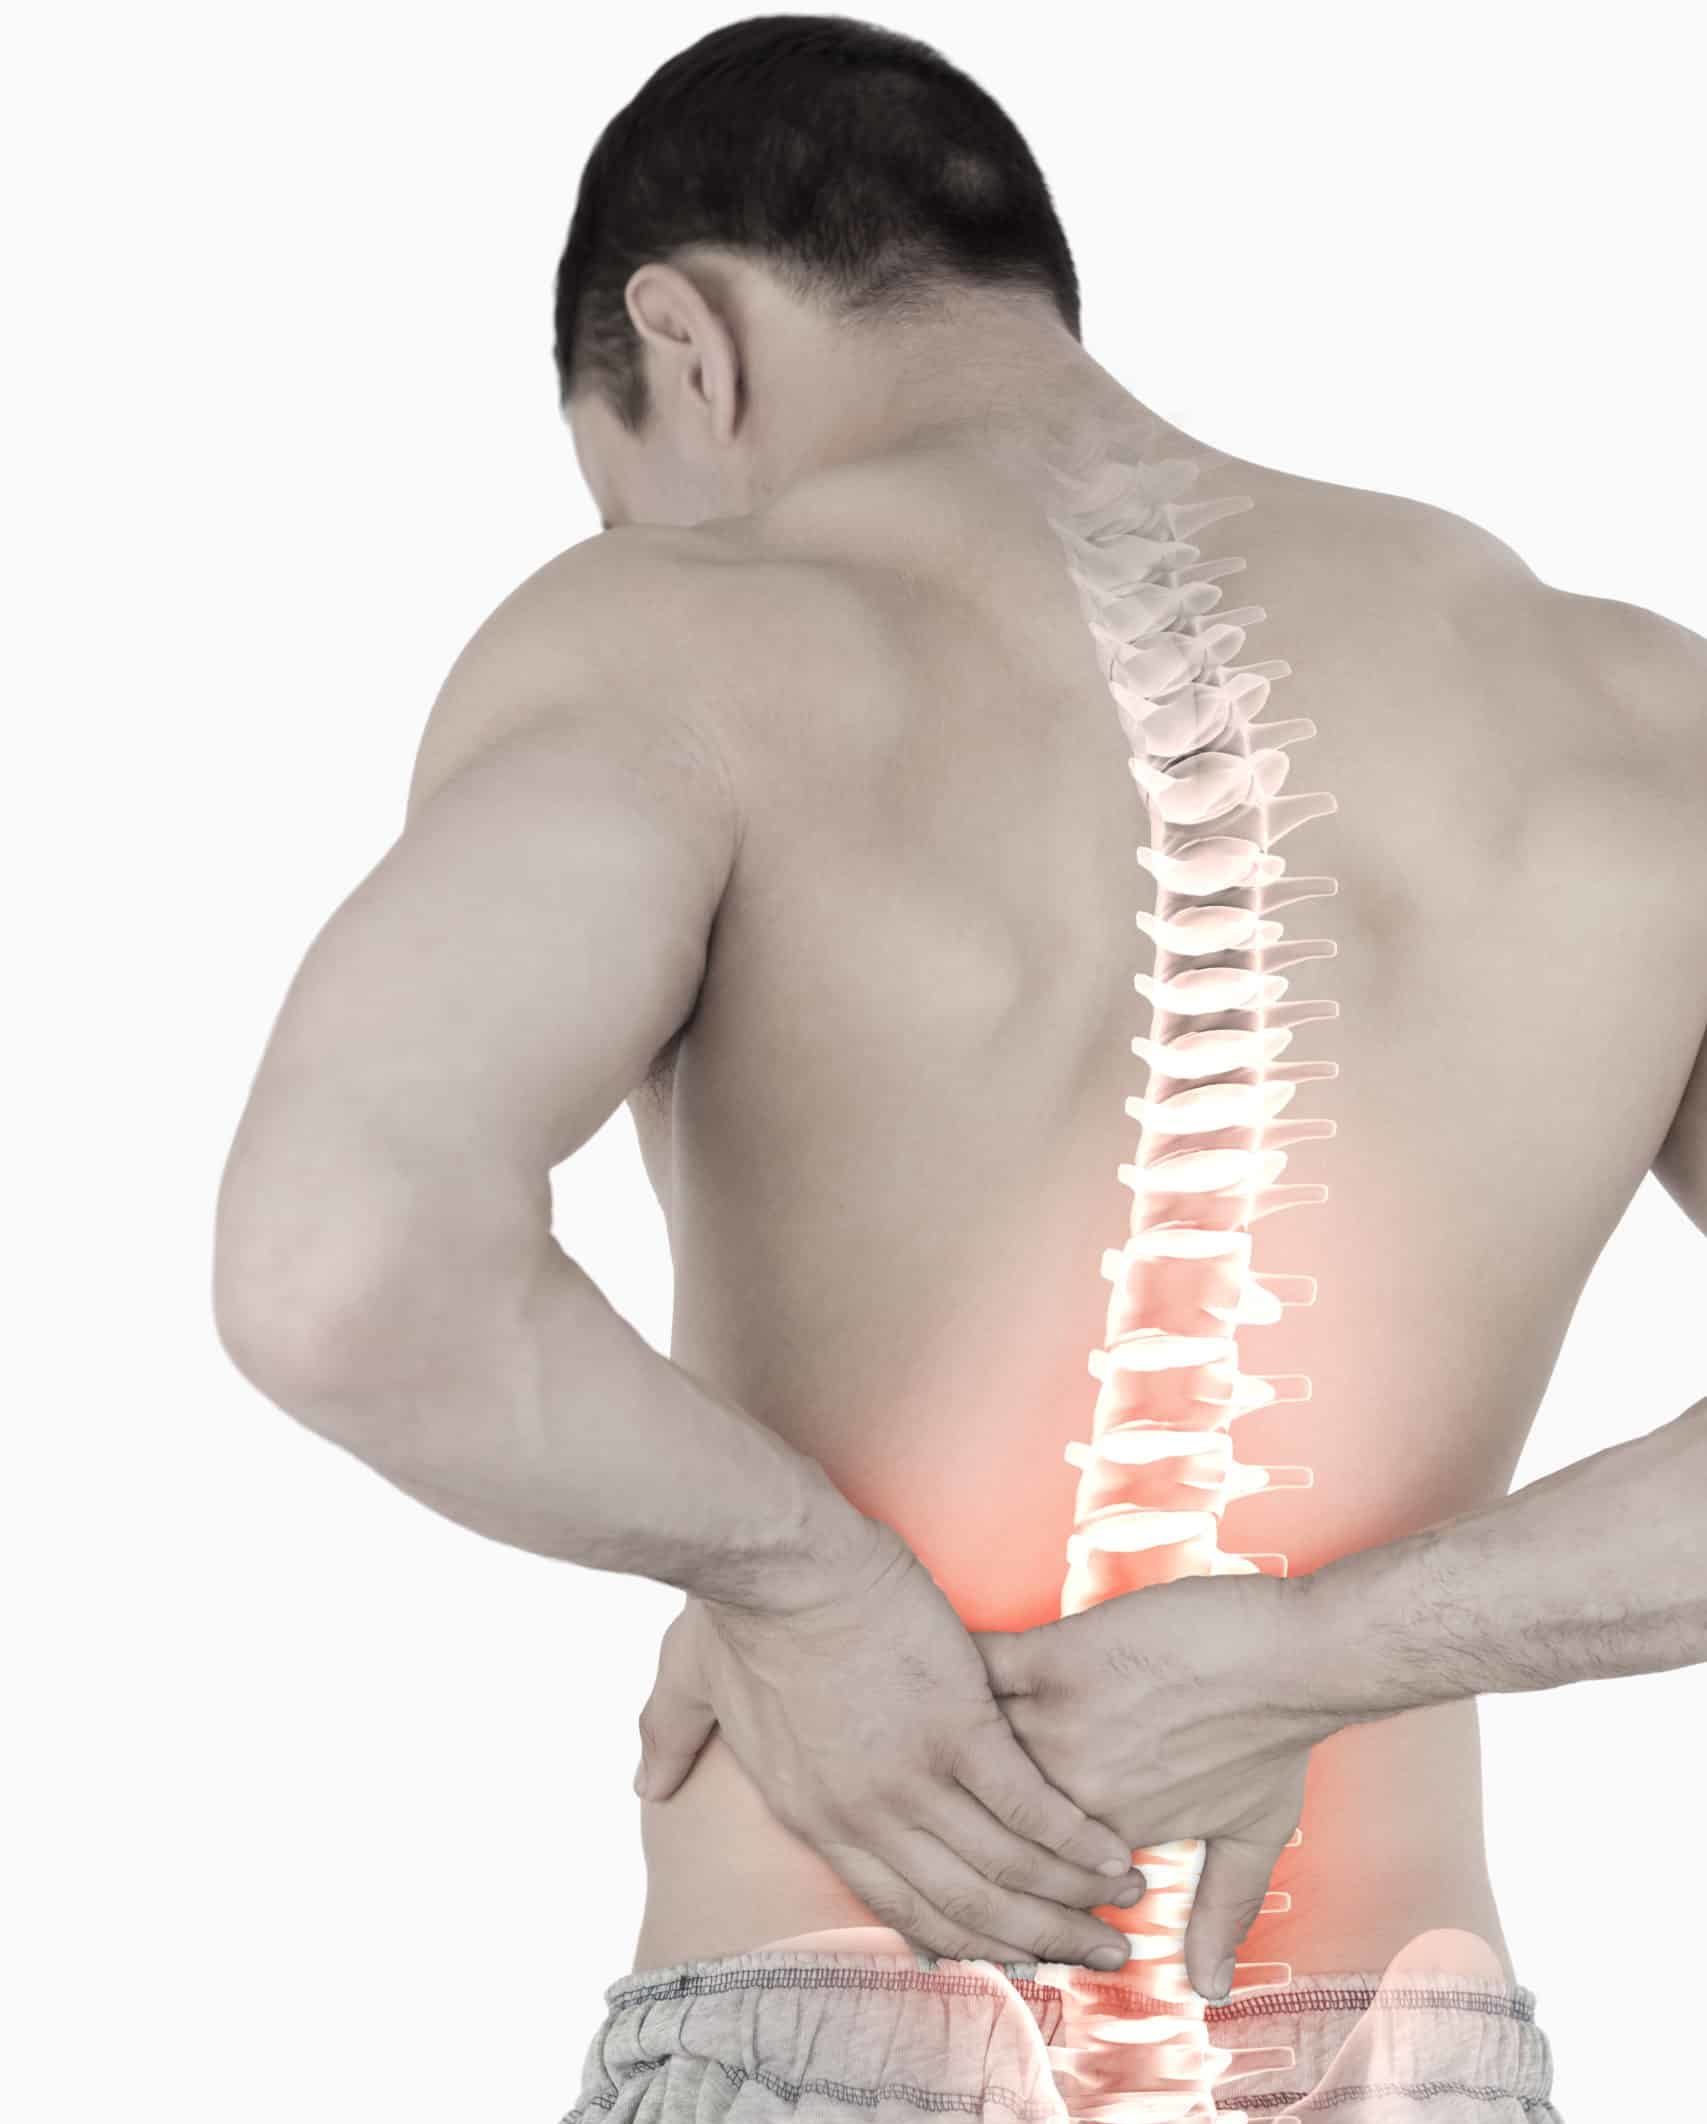 Can Myofascial Pain Syndrome Be Cured?